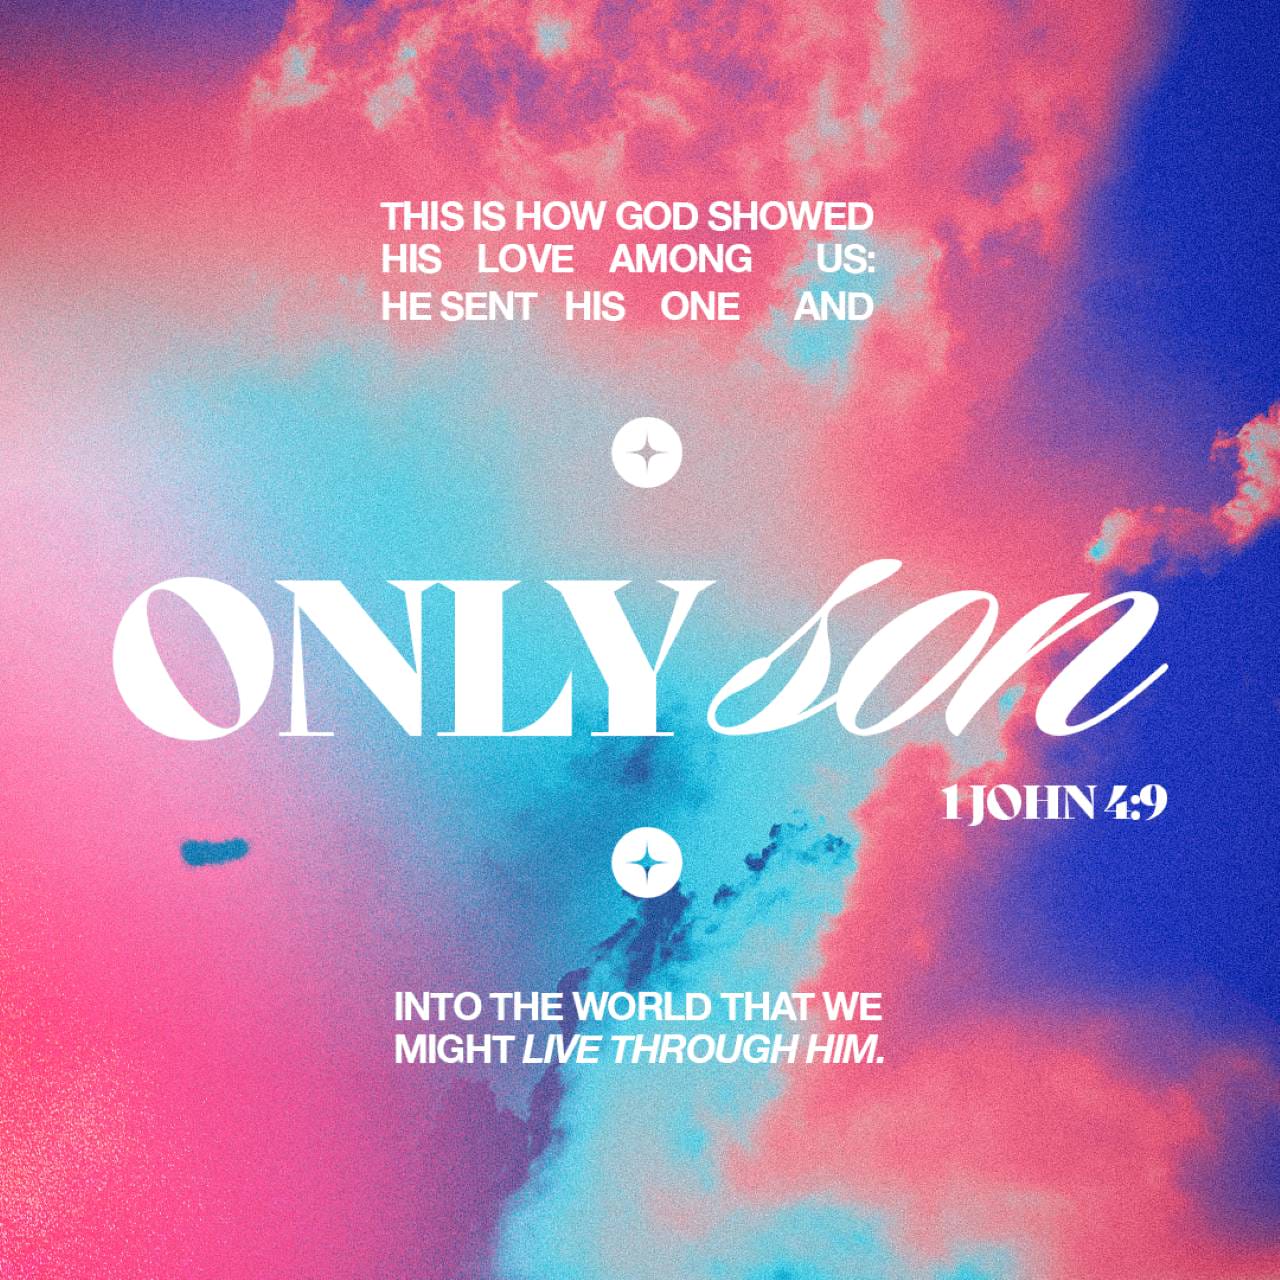 1 John 4:9-10 In this was manifested the love of God toward us, because that God sent his only begotten Son into the world, that we might live through him. Herein is love, not that we loved God, but that he loved u | King James Version (KJV) | Download Th